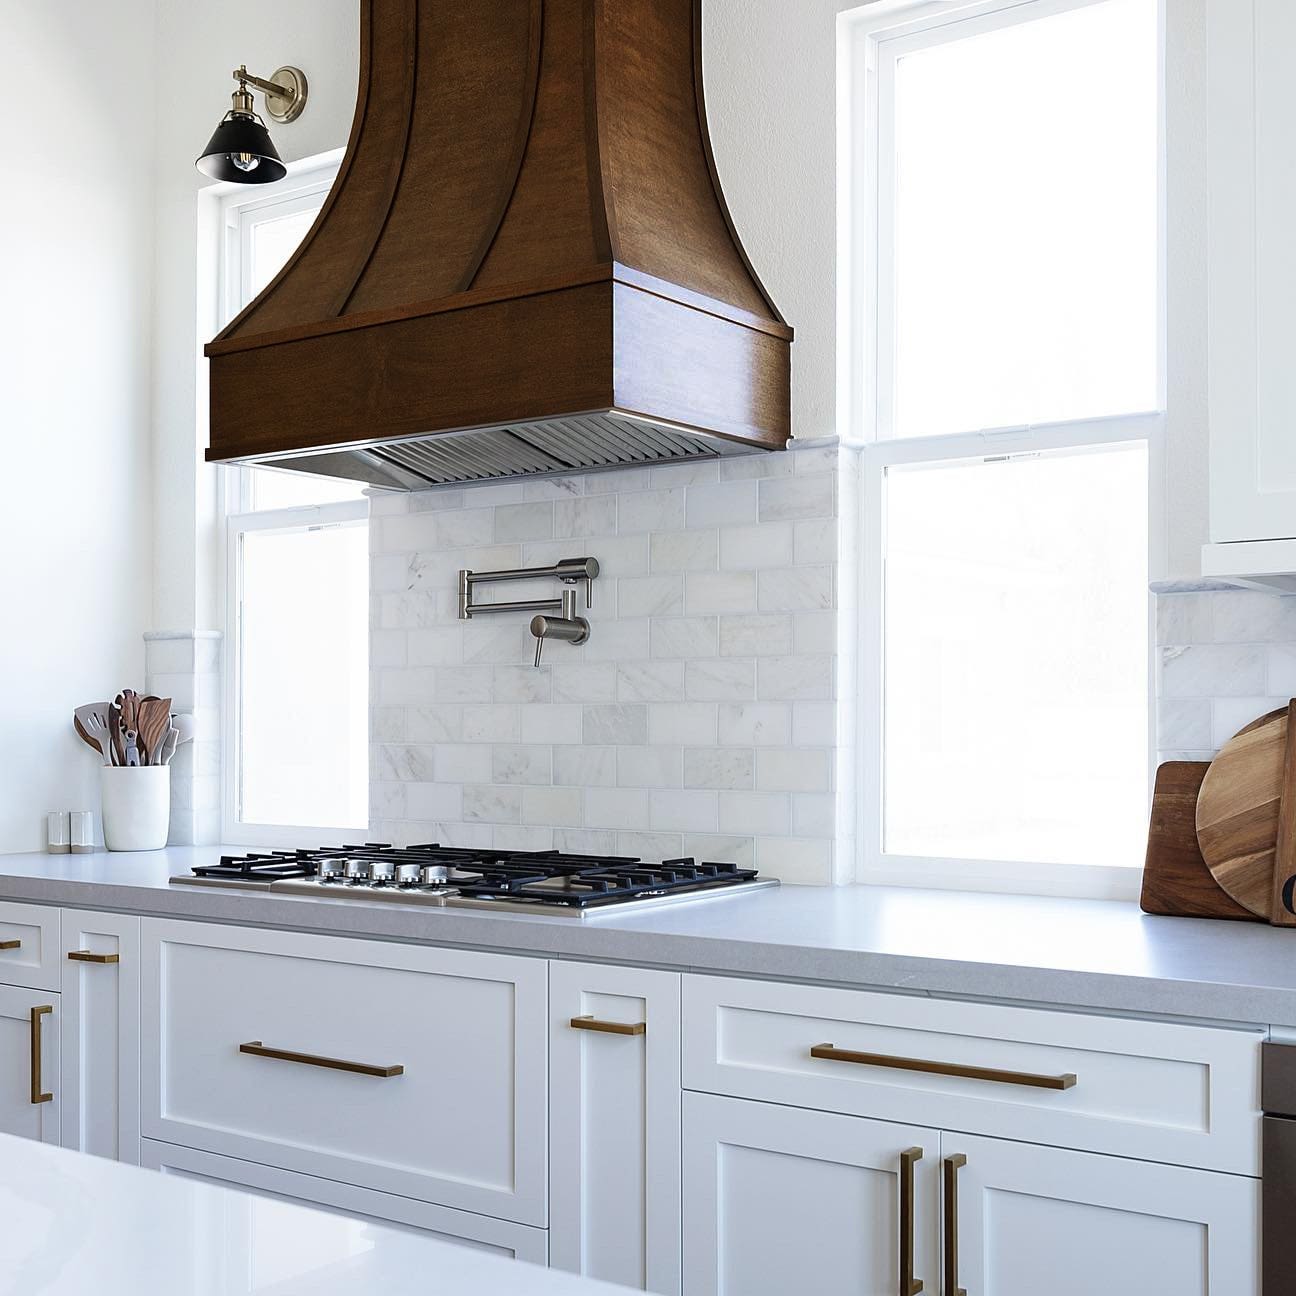 Curved wood range hood with wood strapping in warm brown stain against white shaker cabinets